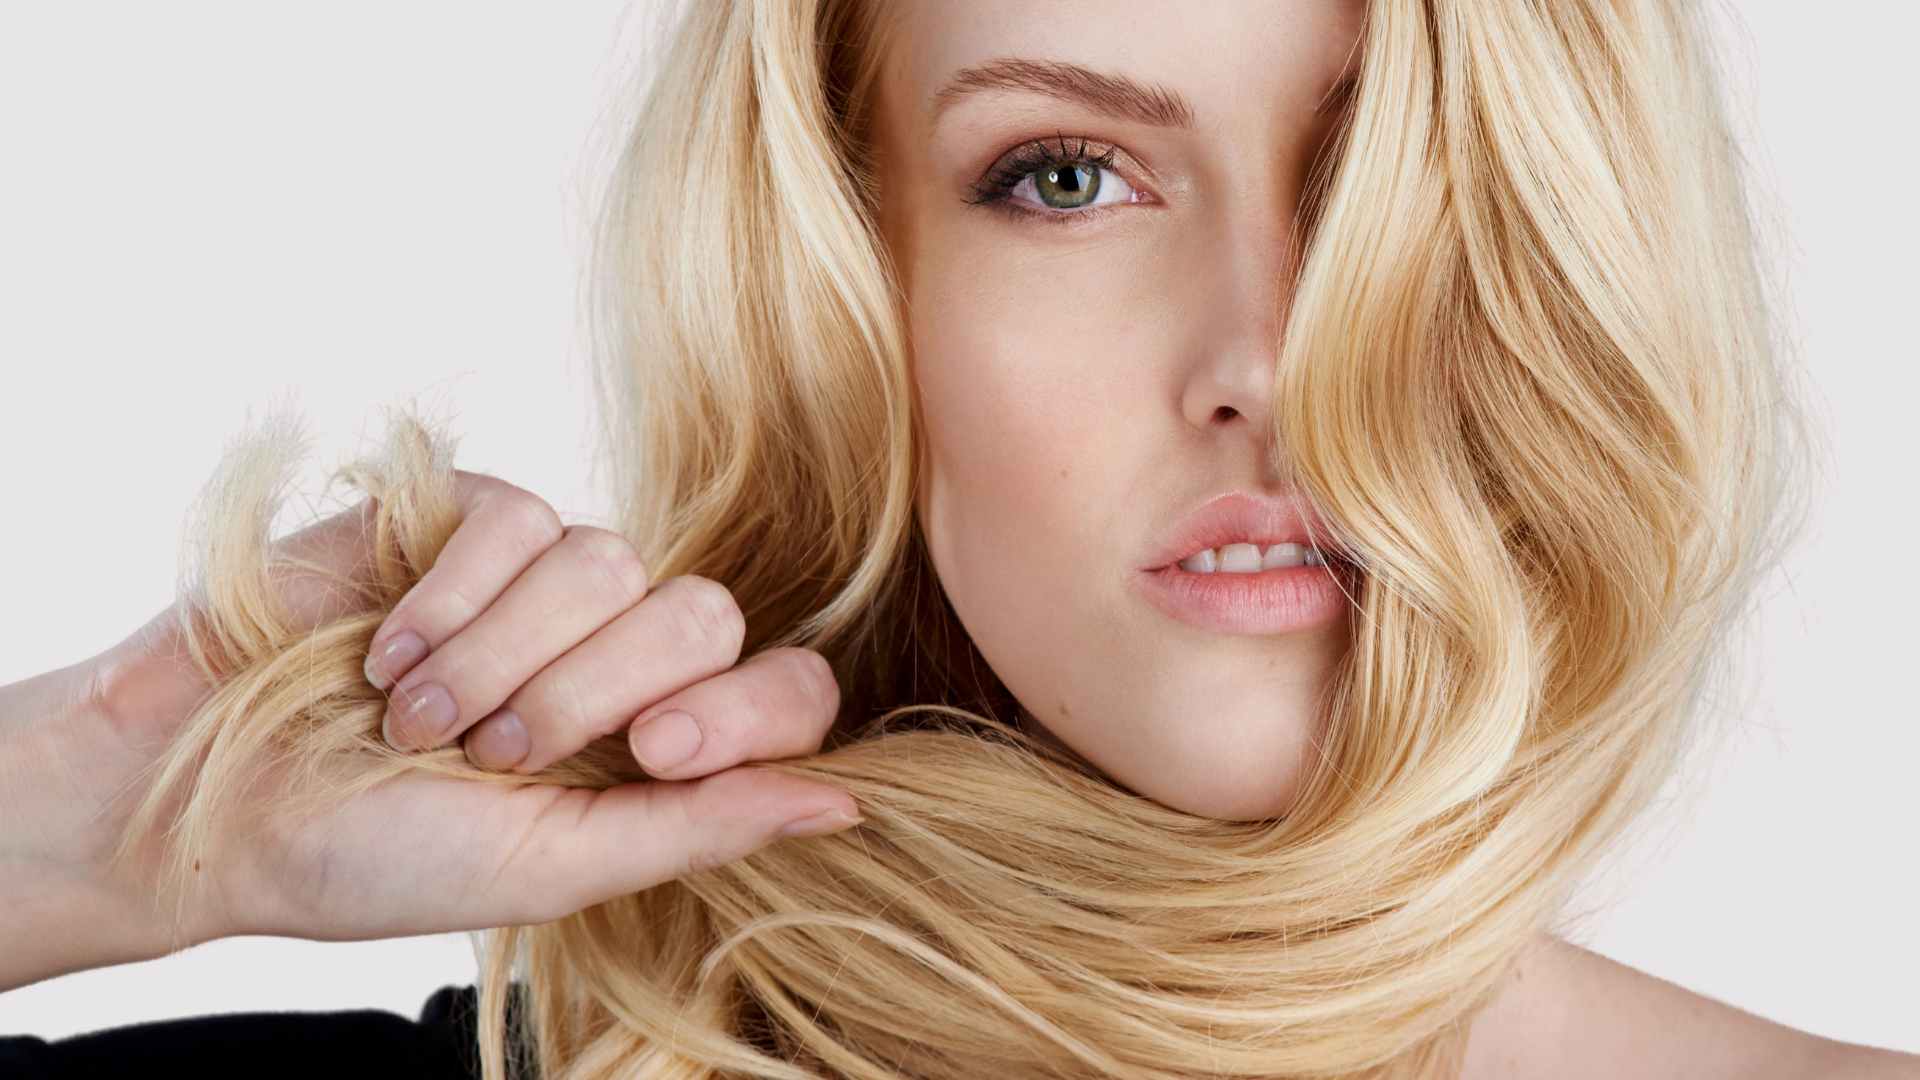 blonde female looking directly at camera holding hair